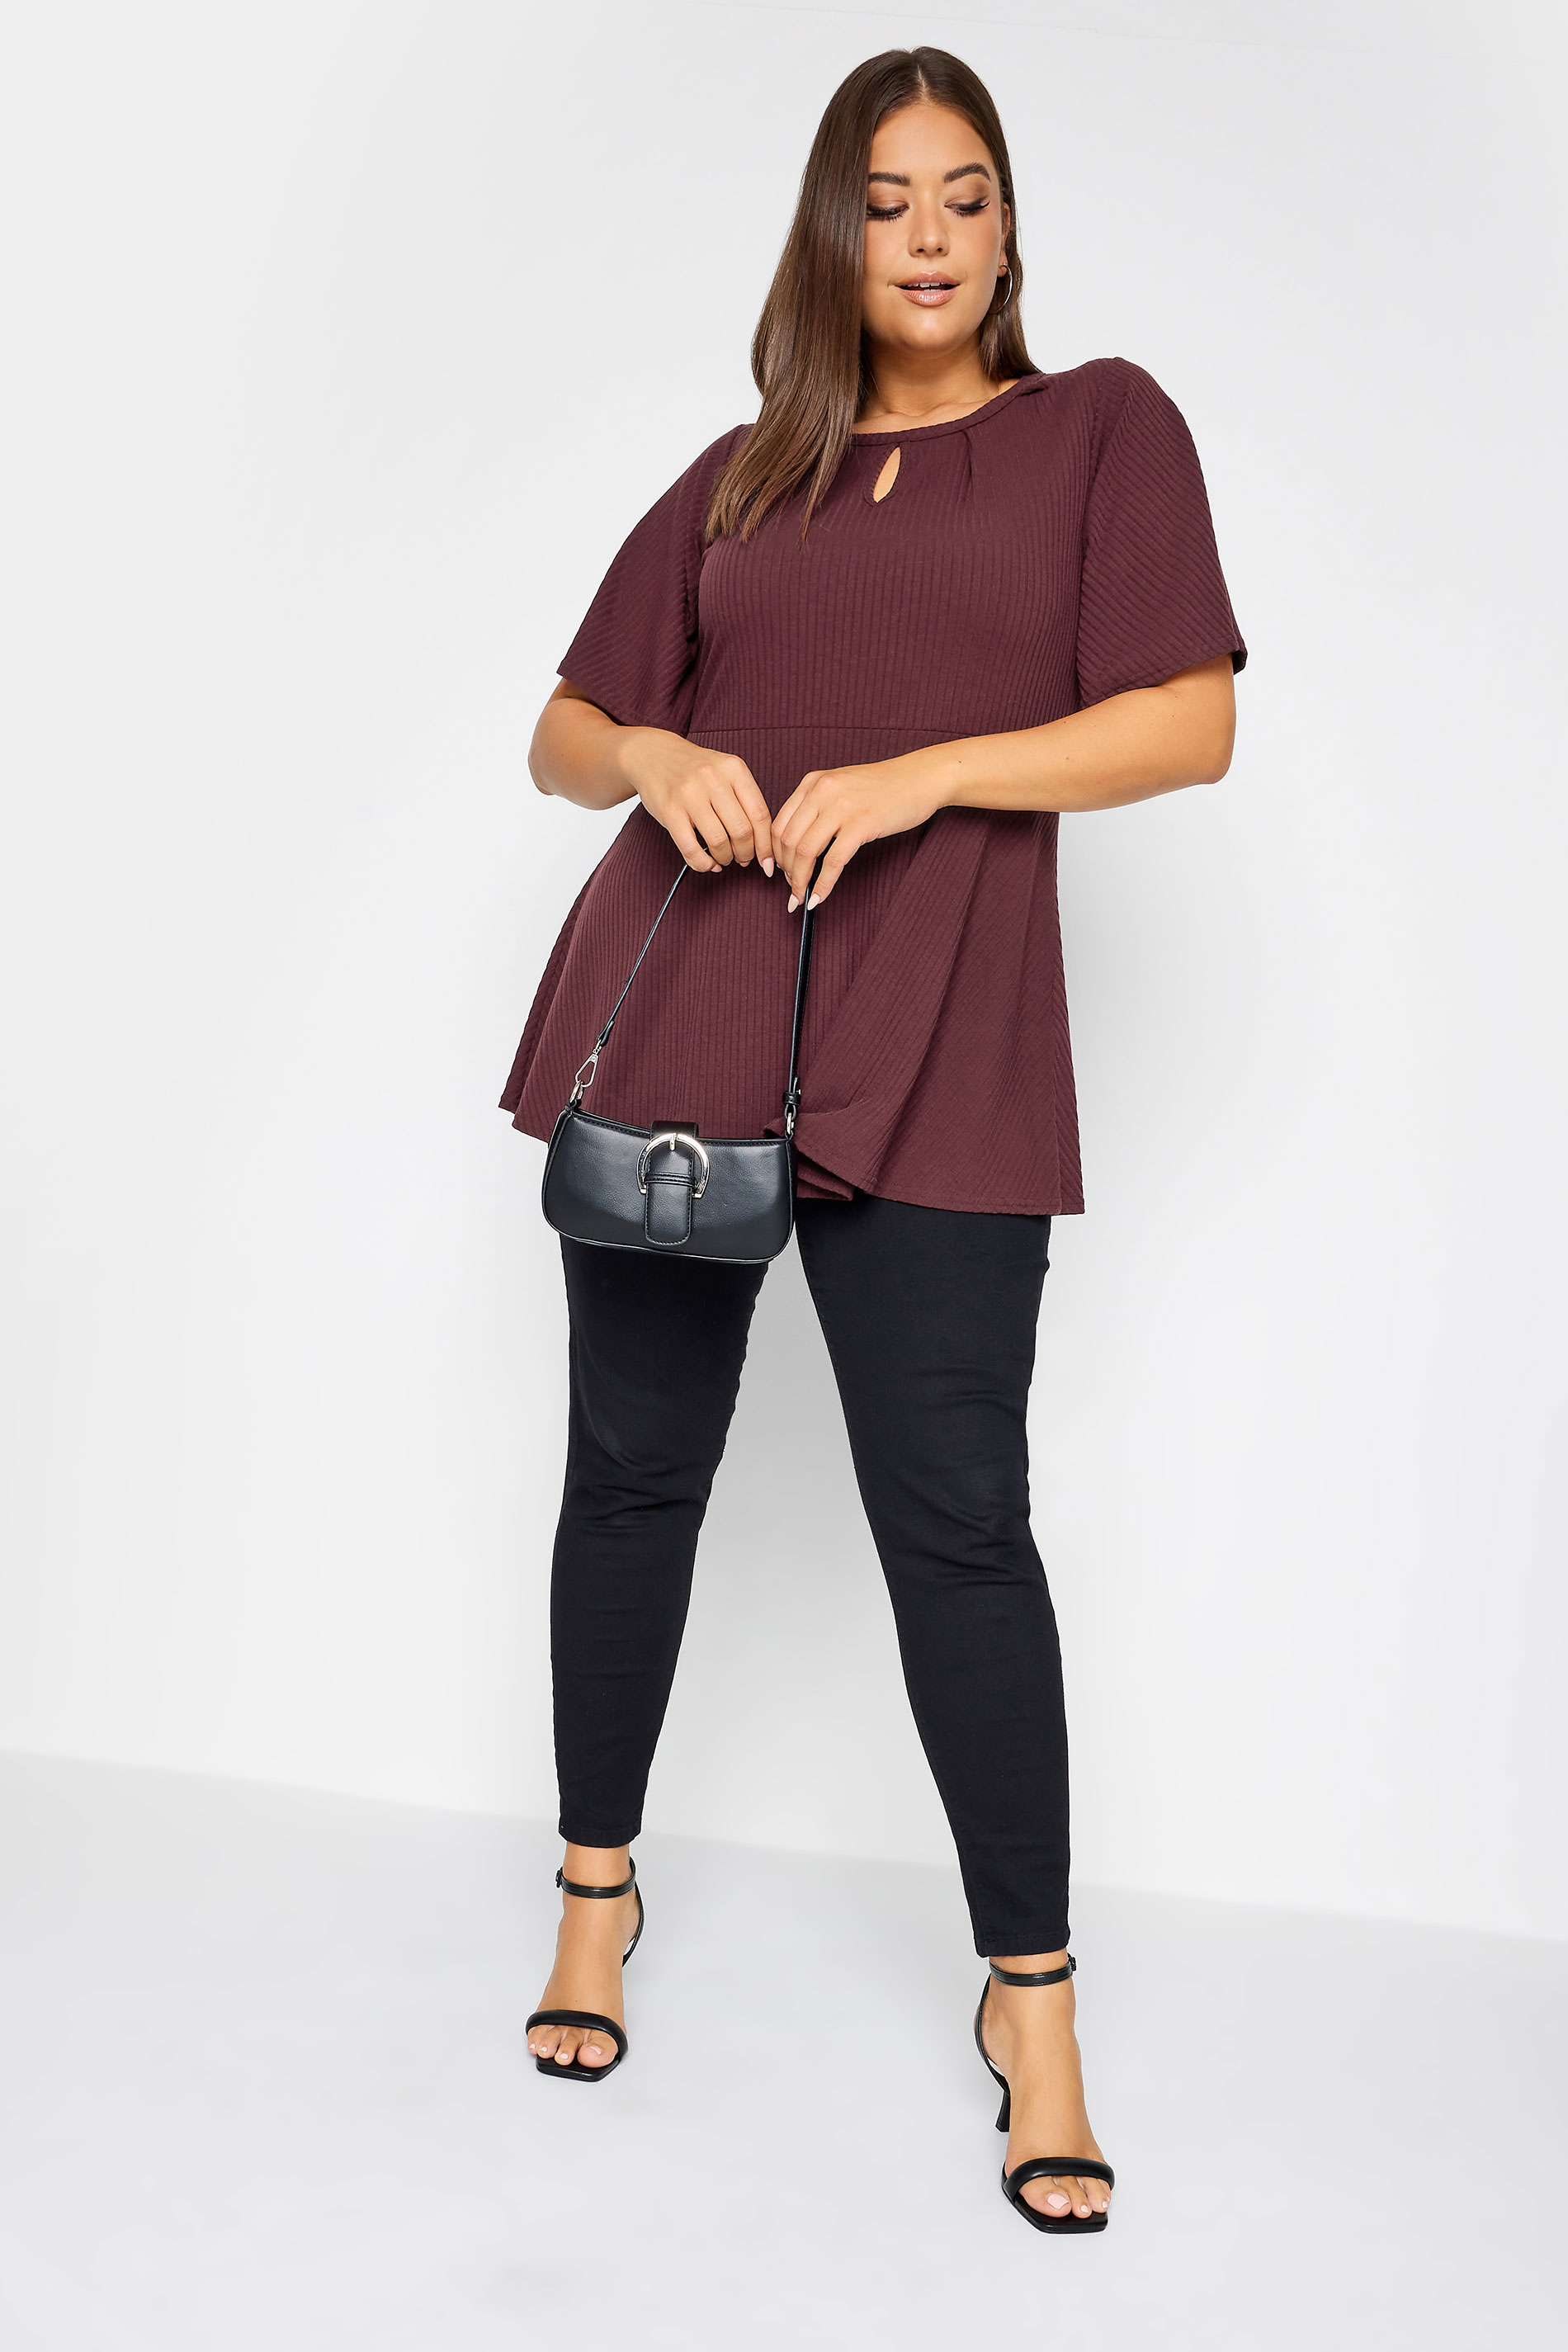 YOURS Plus Size Burgundy Red Keyhole Peplum Top | Yours Clothing 2